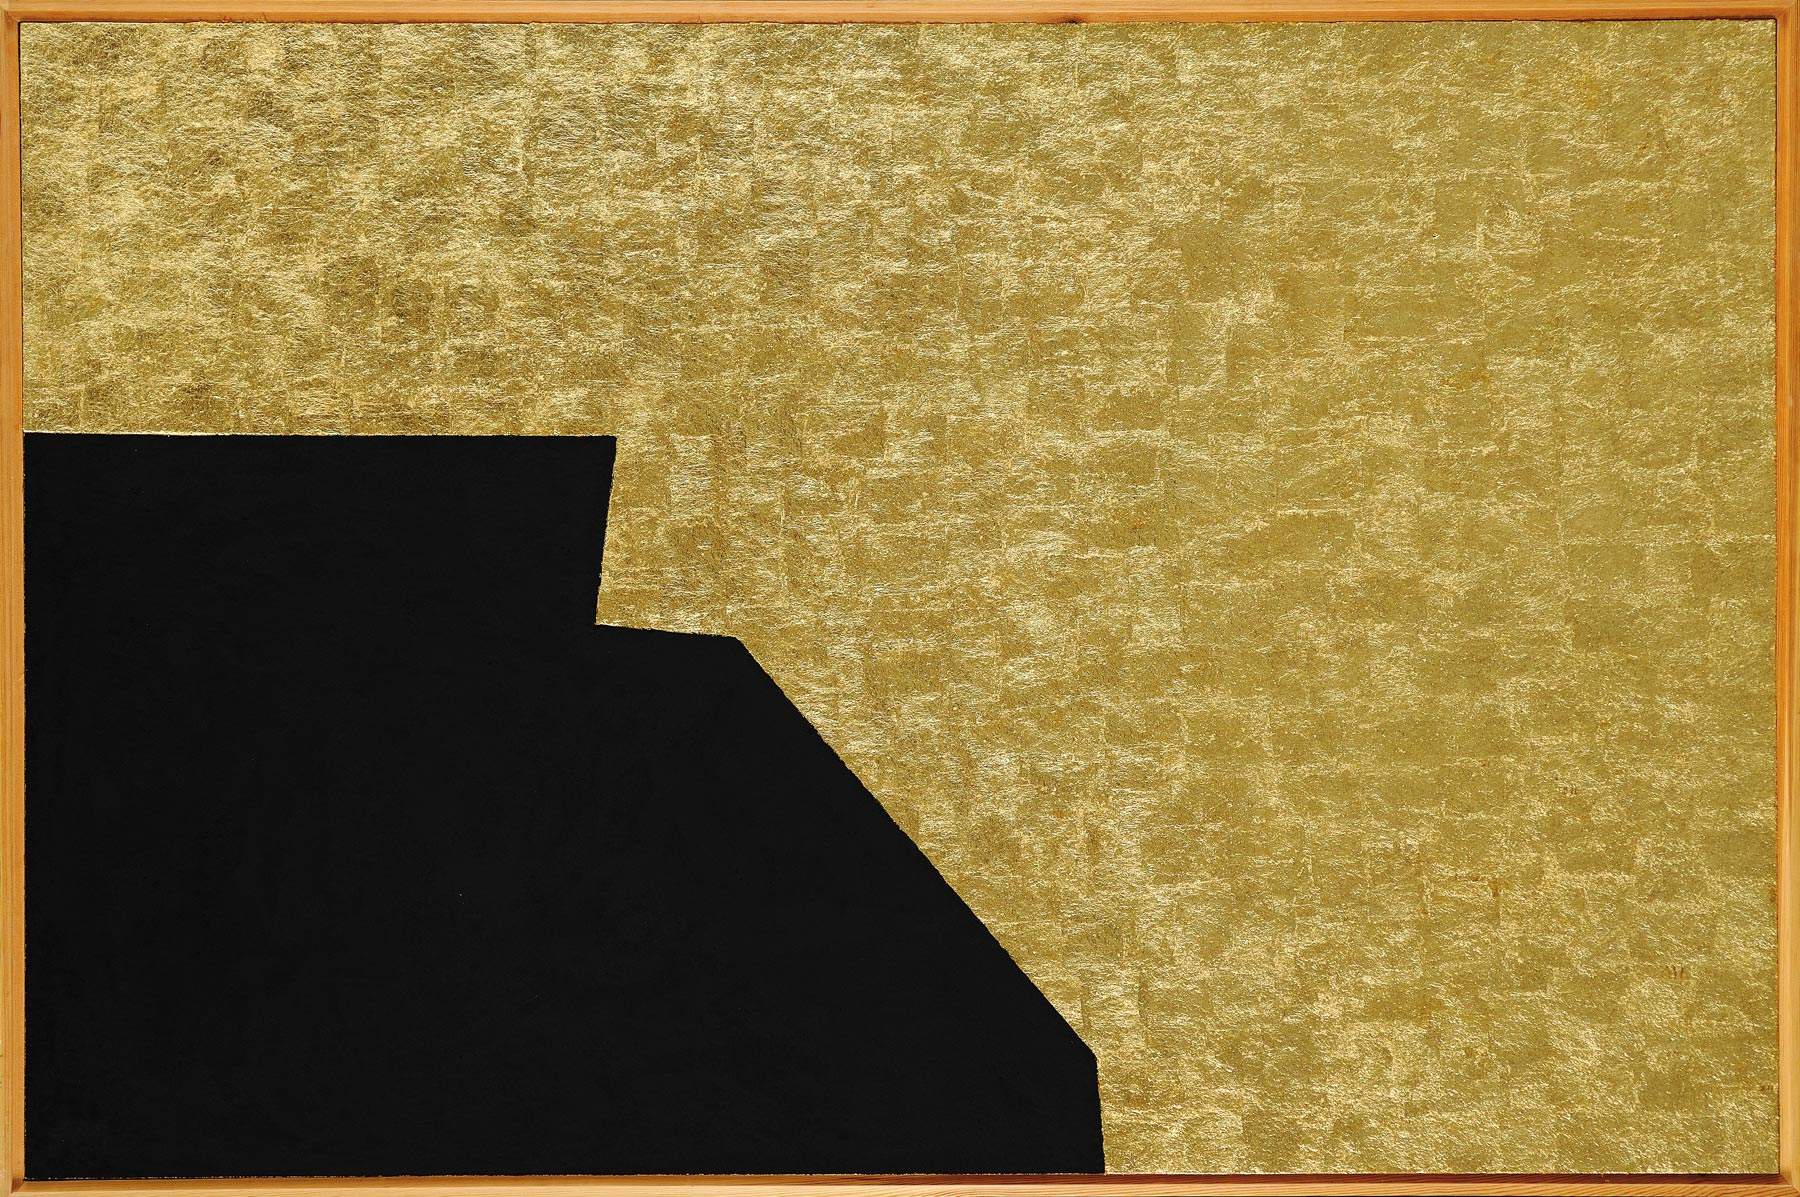 Ravenna, an exhibition at MAR examines the relationship between Alberto Burri and the city